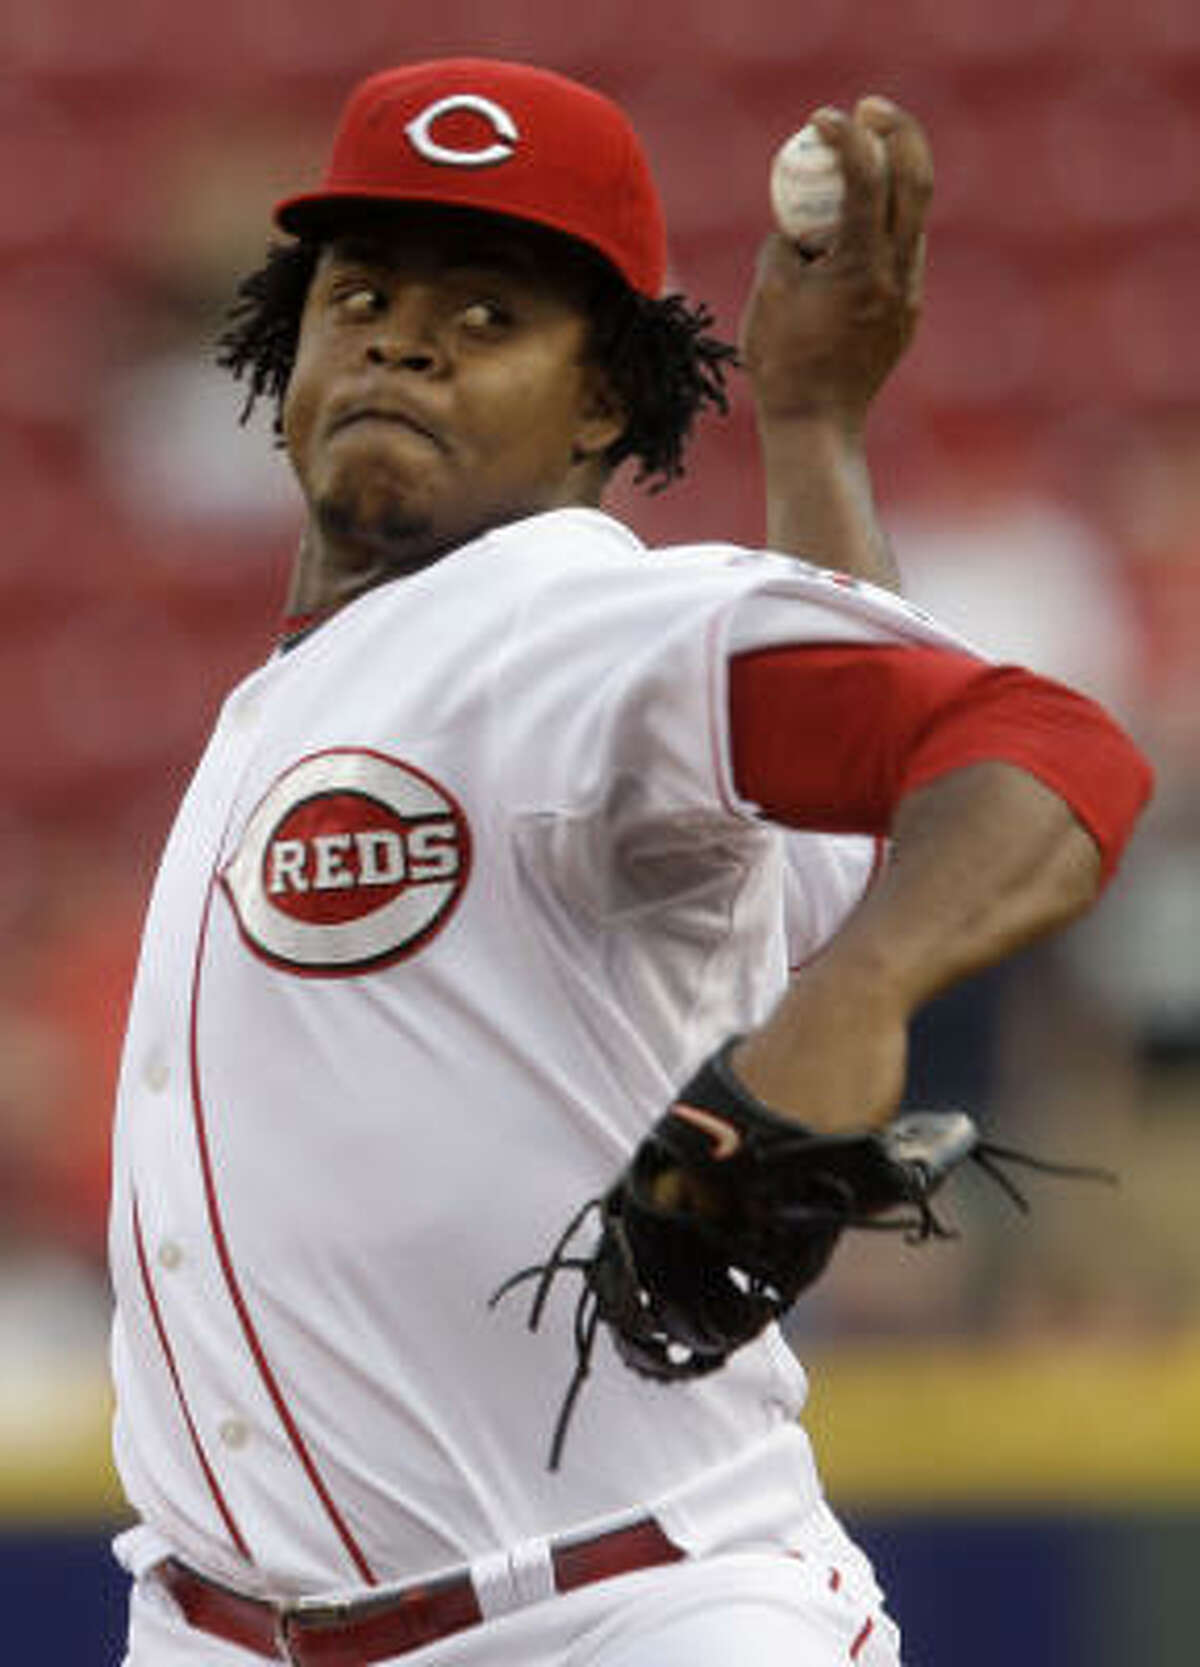 Cincinnati Reds pitcher Edinson Volquez threw eight scoreless innings to keep the Astros from their 12th consecutive win at Great American Ball Park.